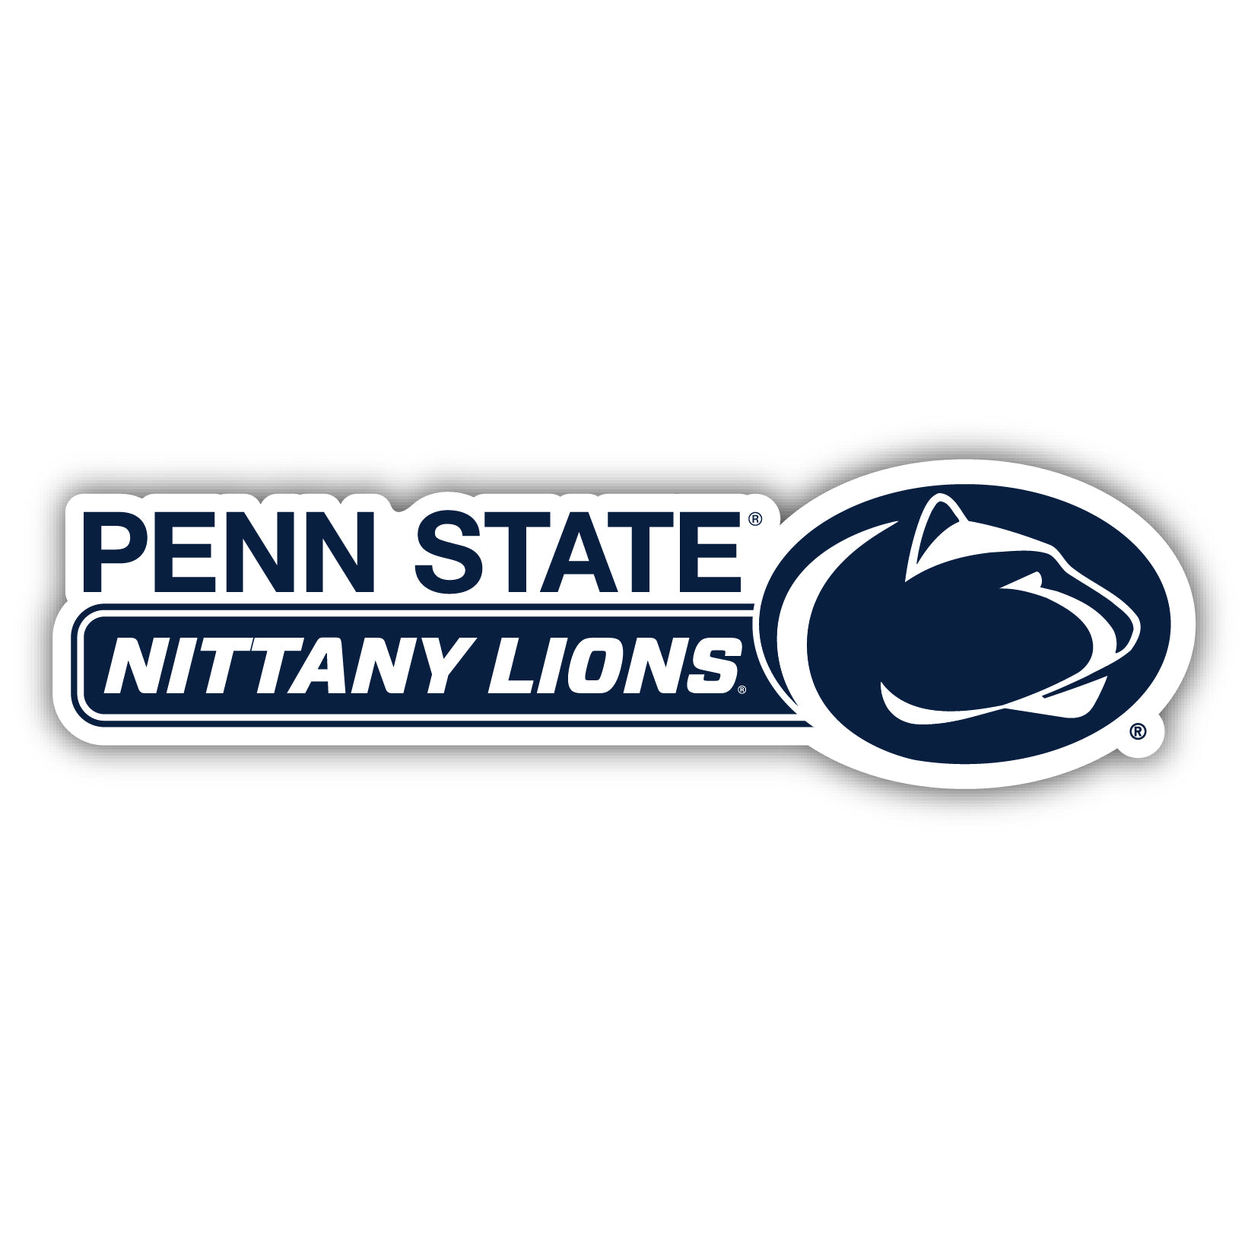 Penn State Nittany Lions 4 Inch Wide Colorful Vinyl Decal Sticker